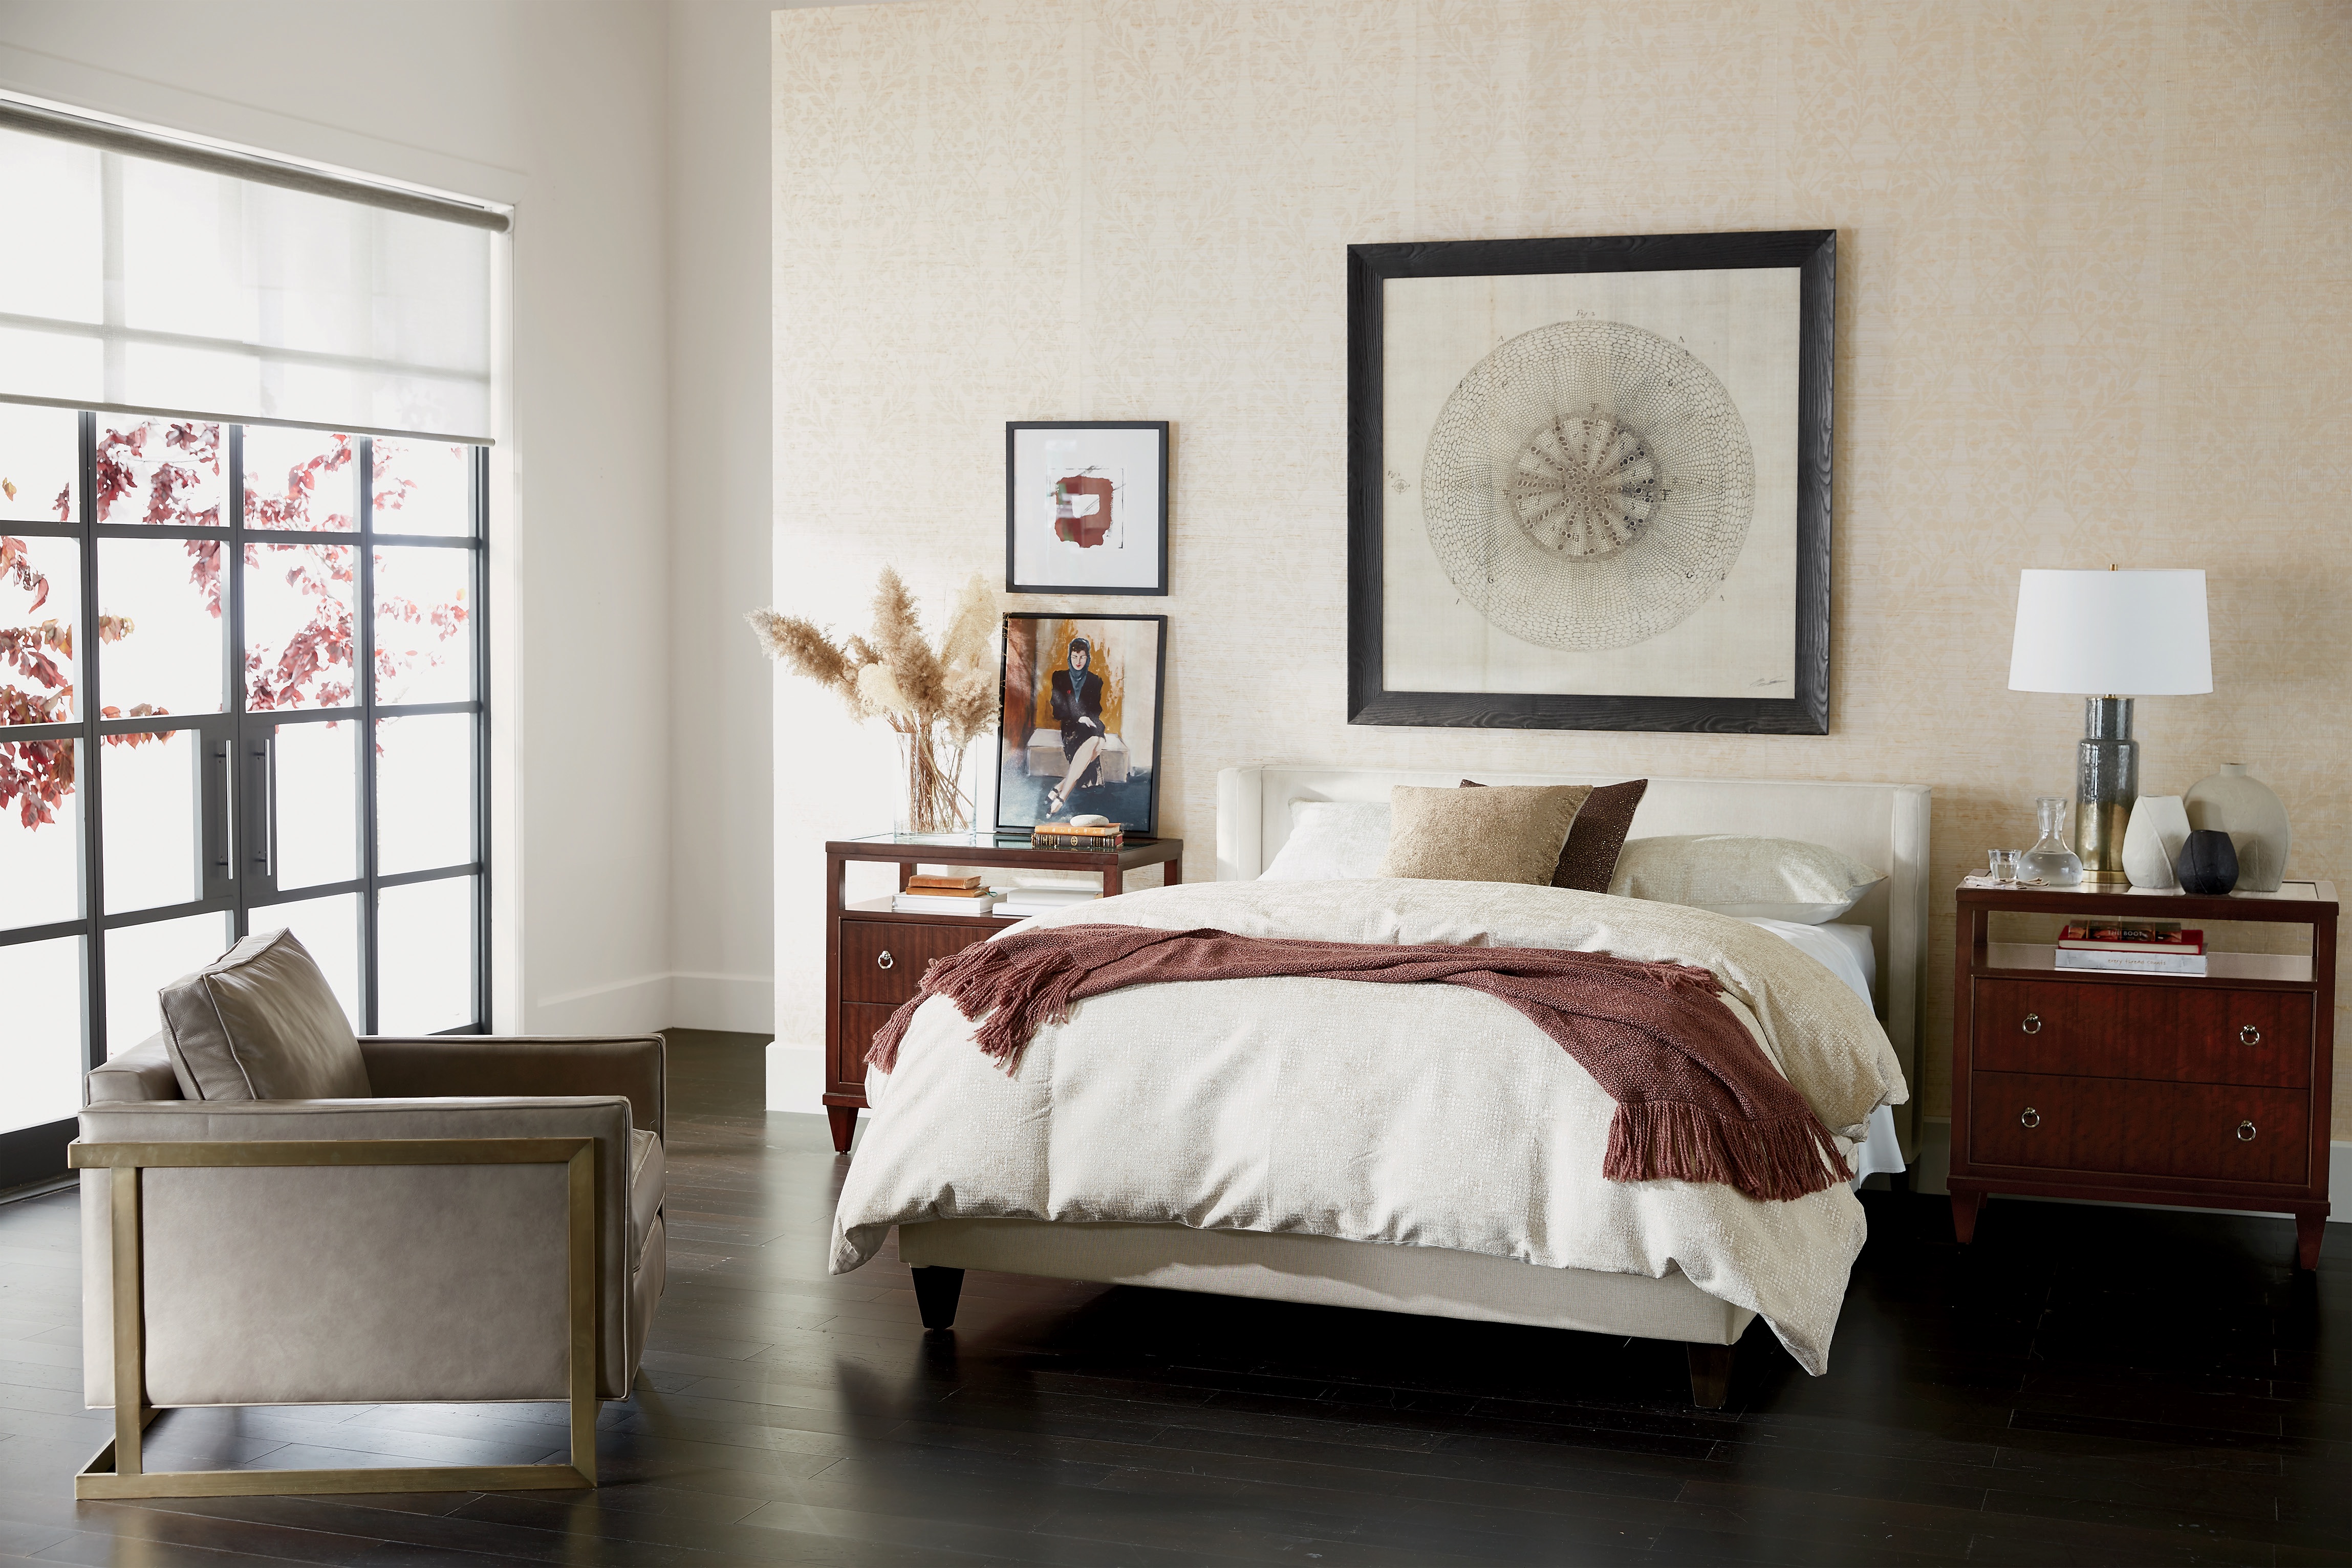 Ethan Allen Launches The Artisan Collection Design Middle East